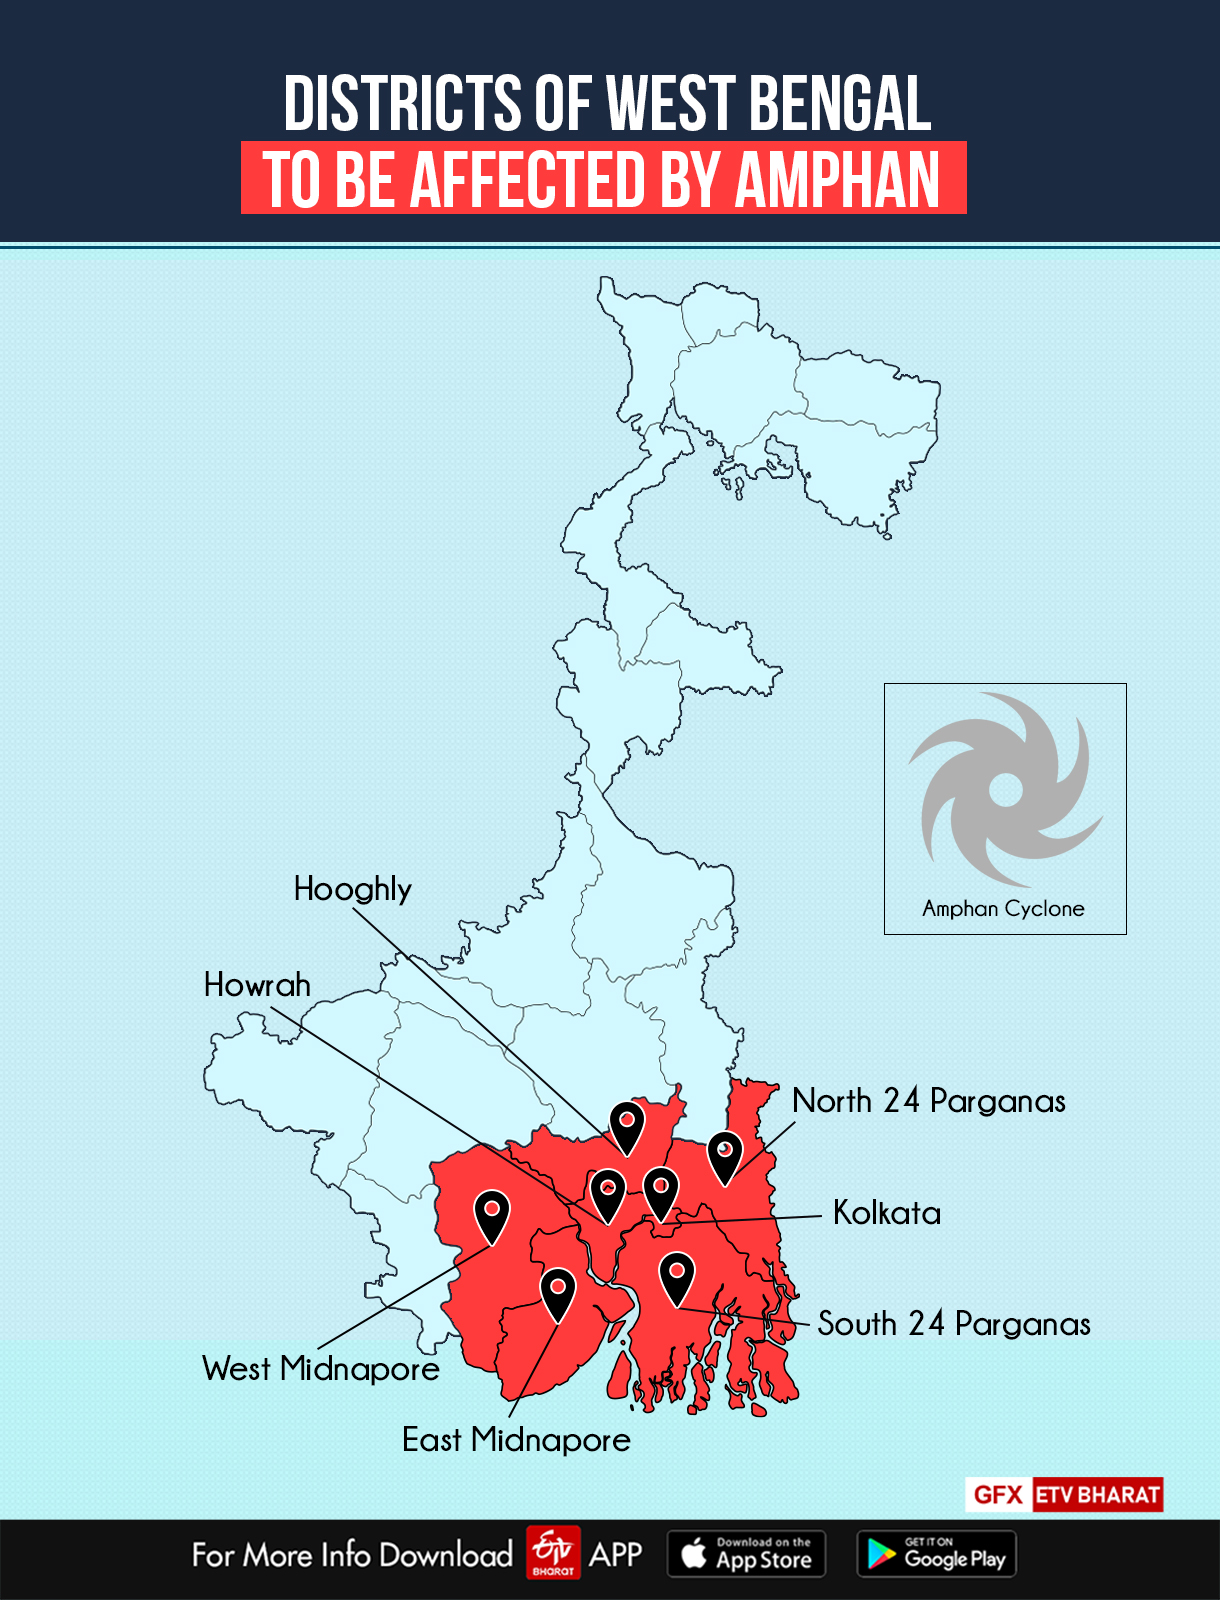 Districts in West Bengal affected by Amphan